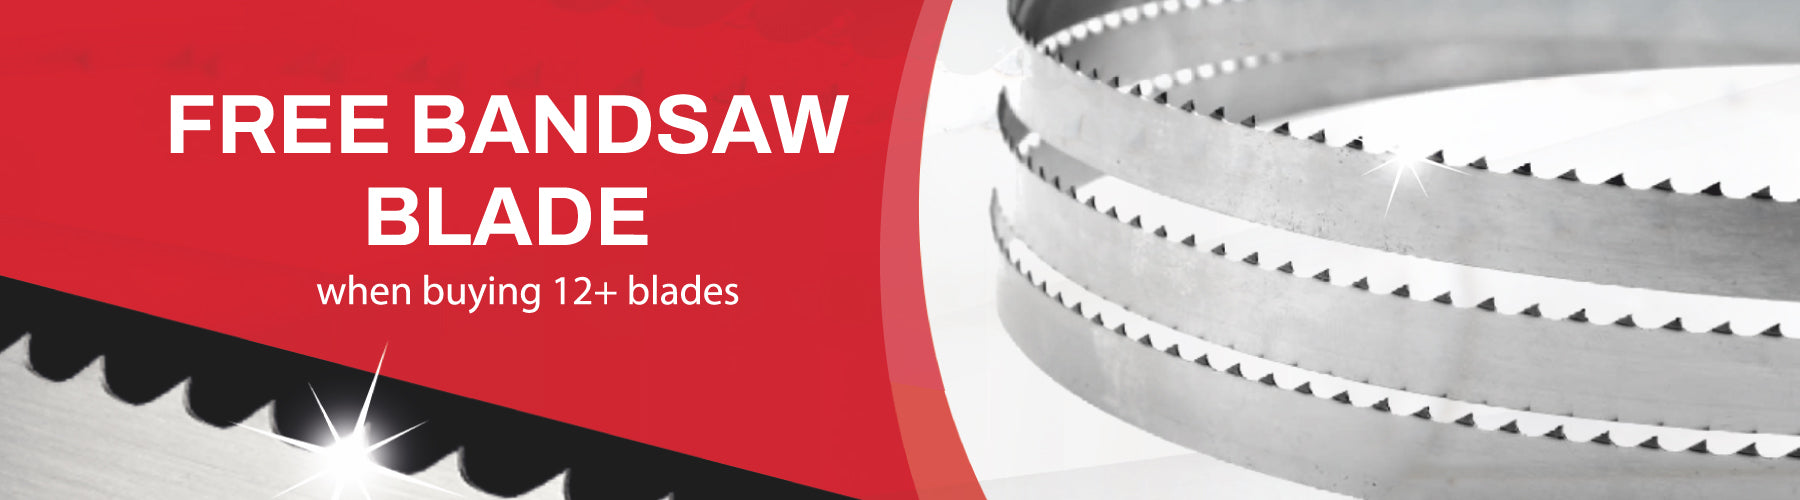 Free Bandsaw Blade when buying 12 or more Band saw Blades